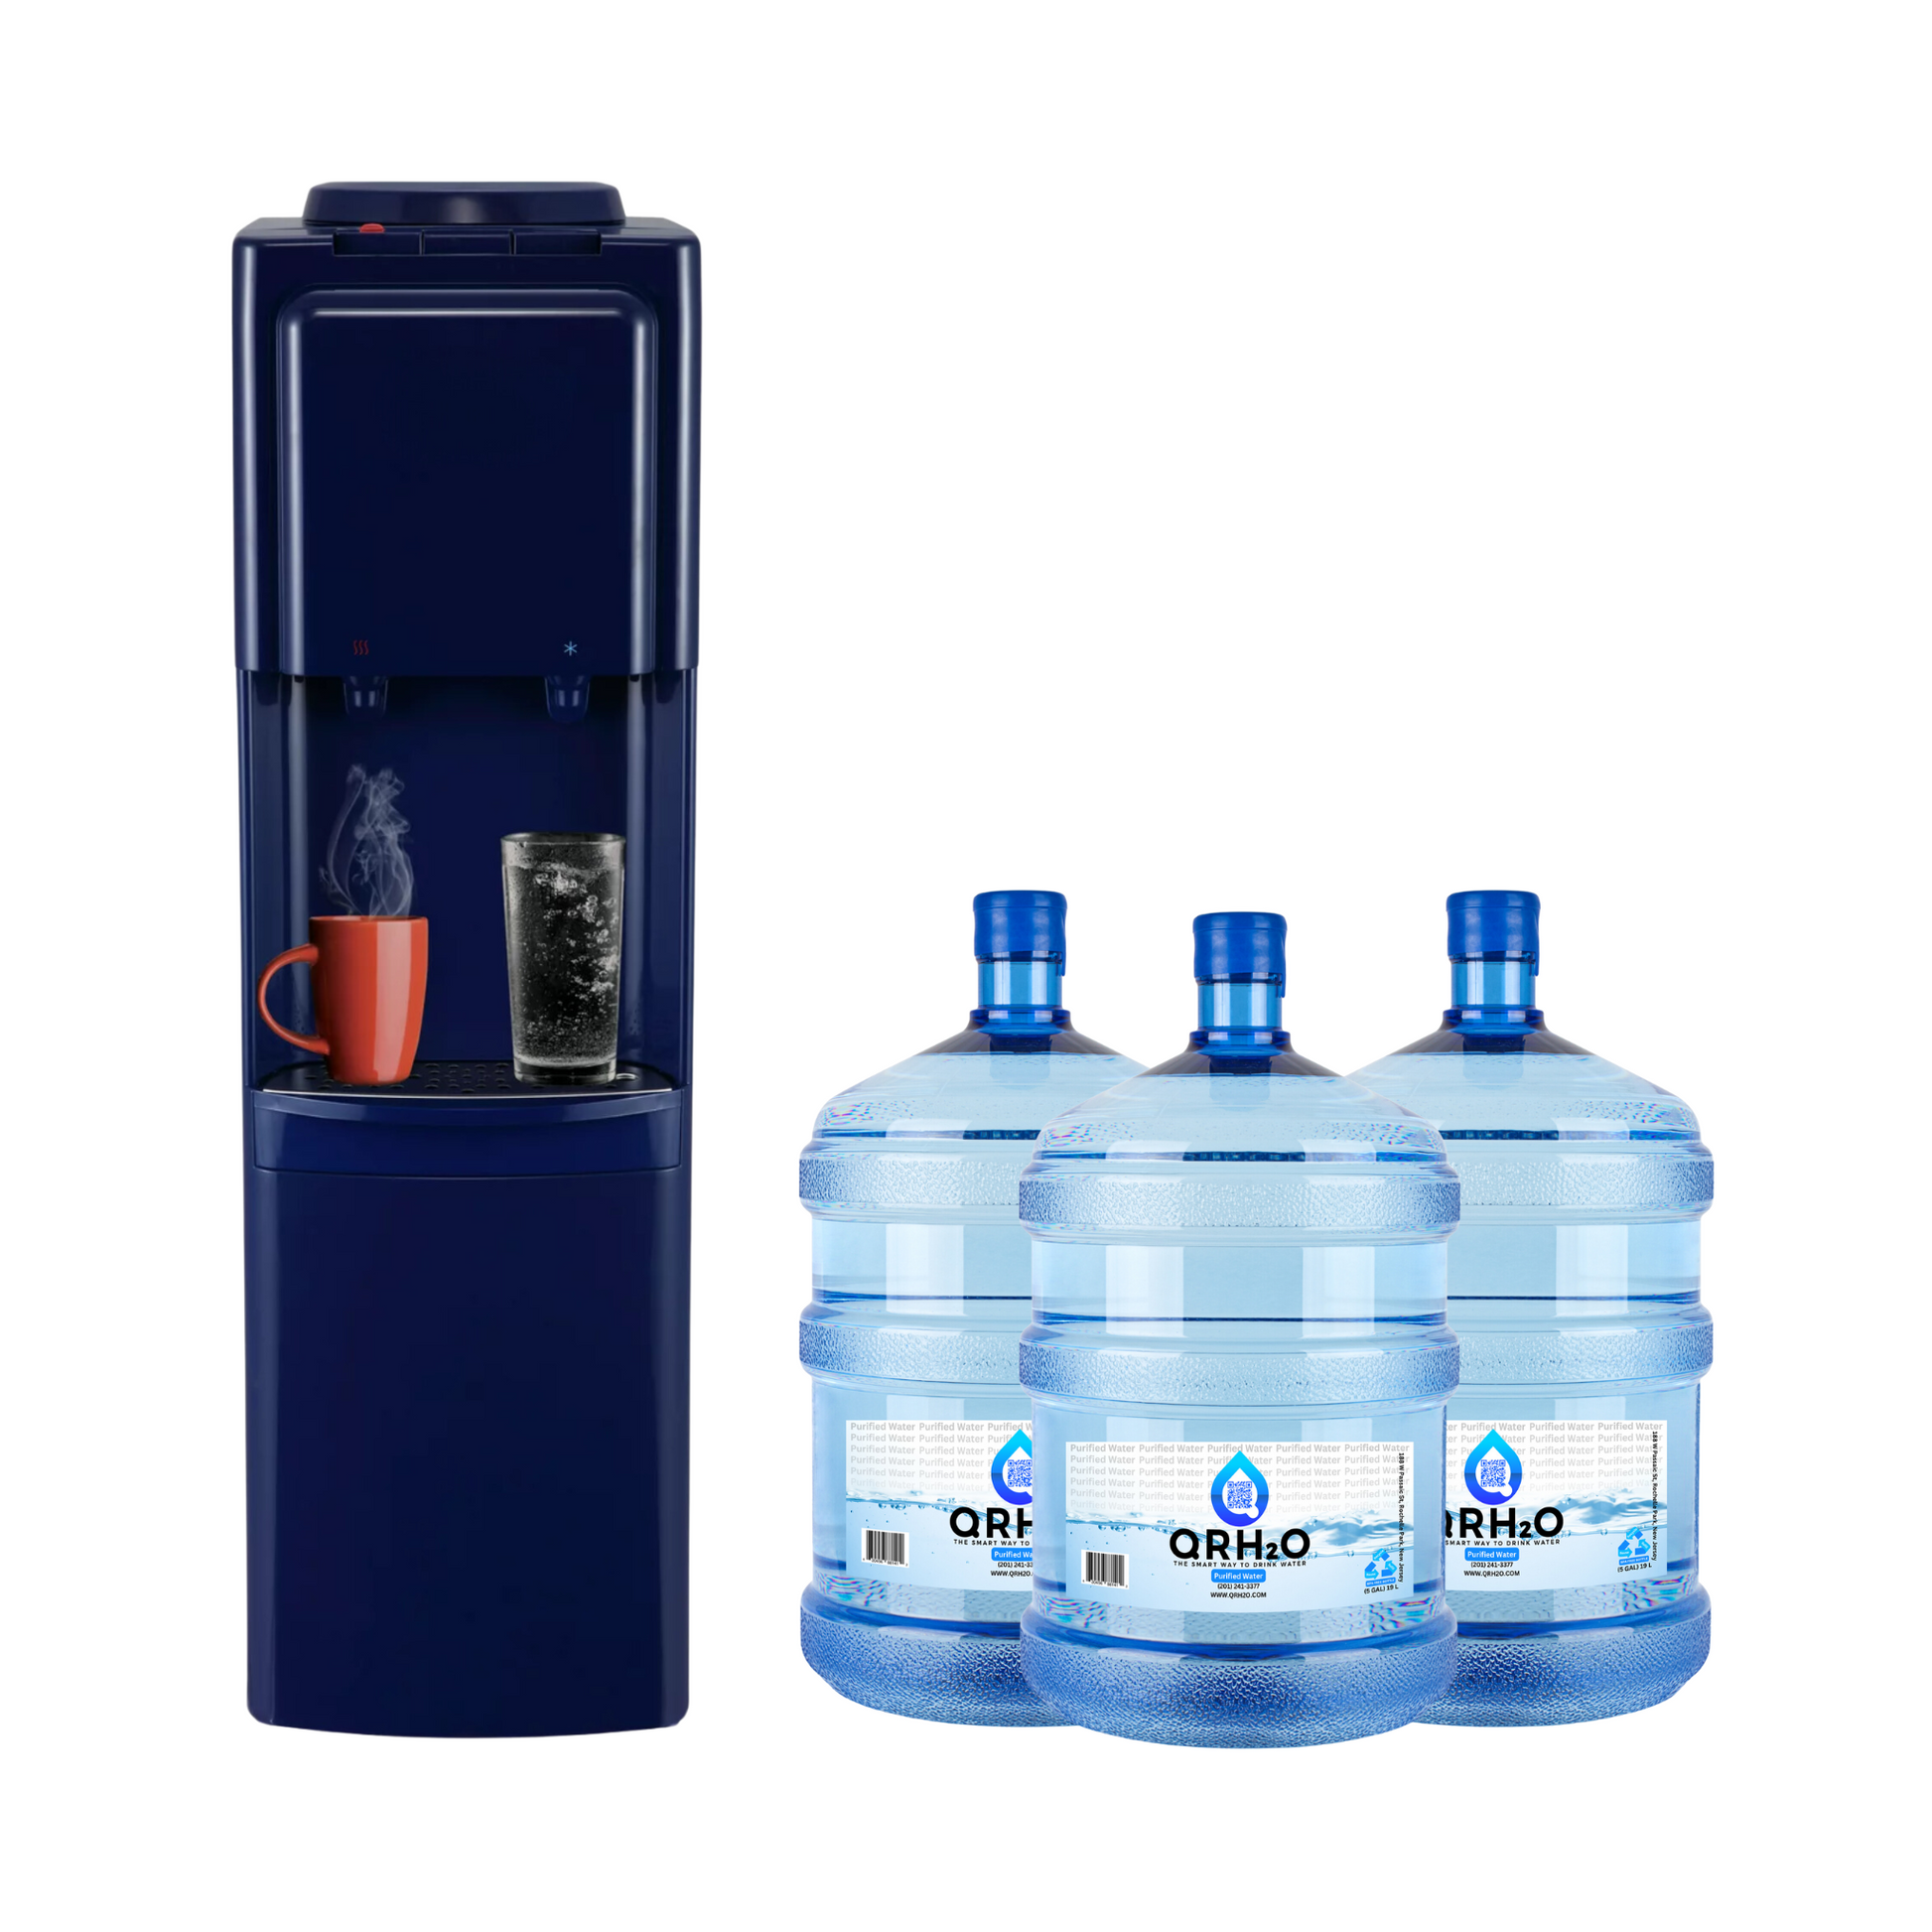 Stay hydrated with ease with 3 of our 5-gallon bottles, offering either purified or alkaline water, and a convenient top-loading hot and cold dispenser in a sleek navy blue design from Primo.